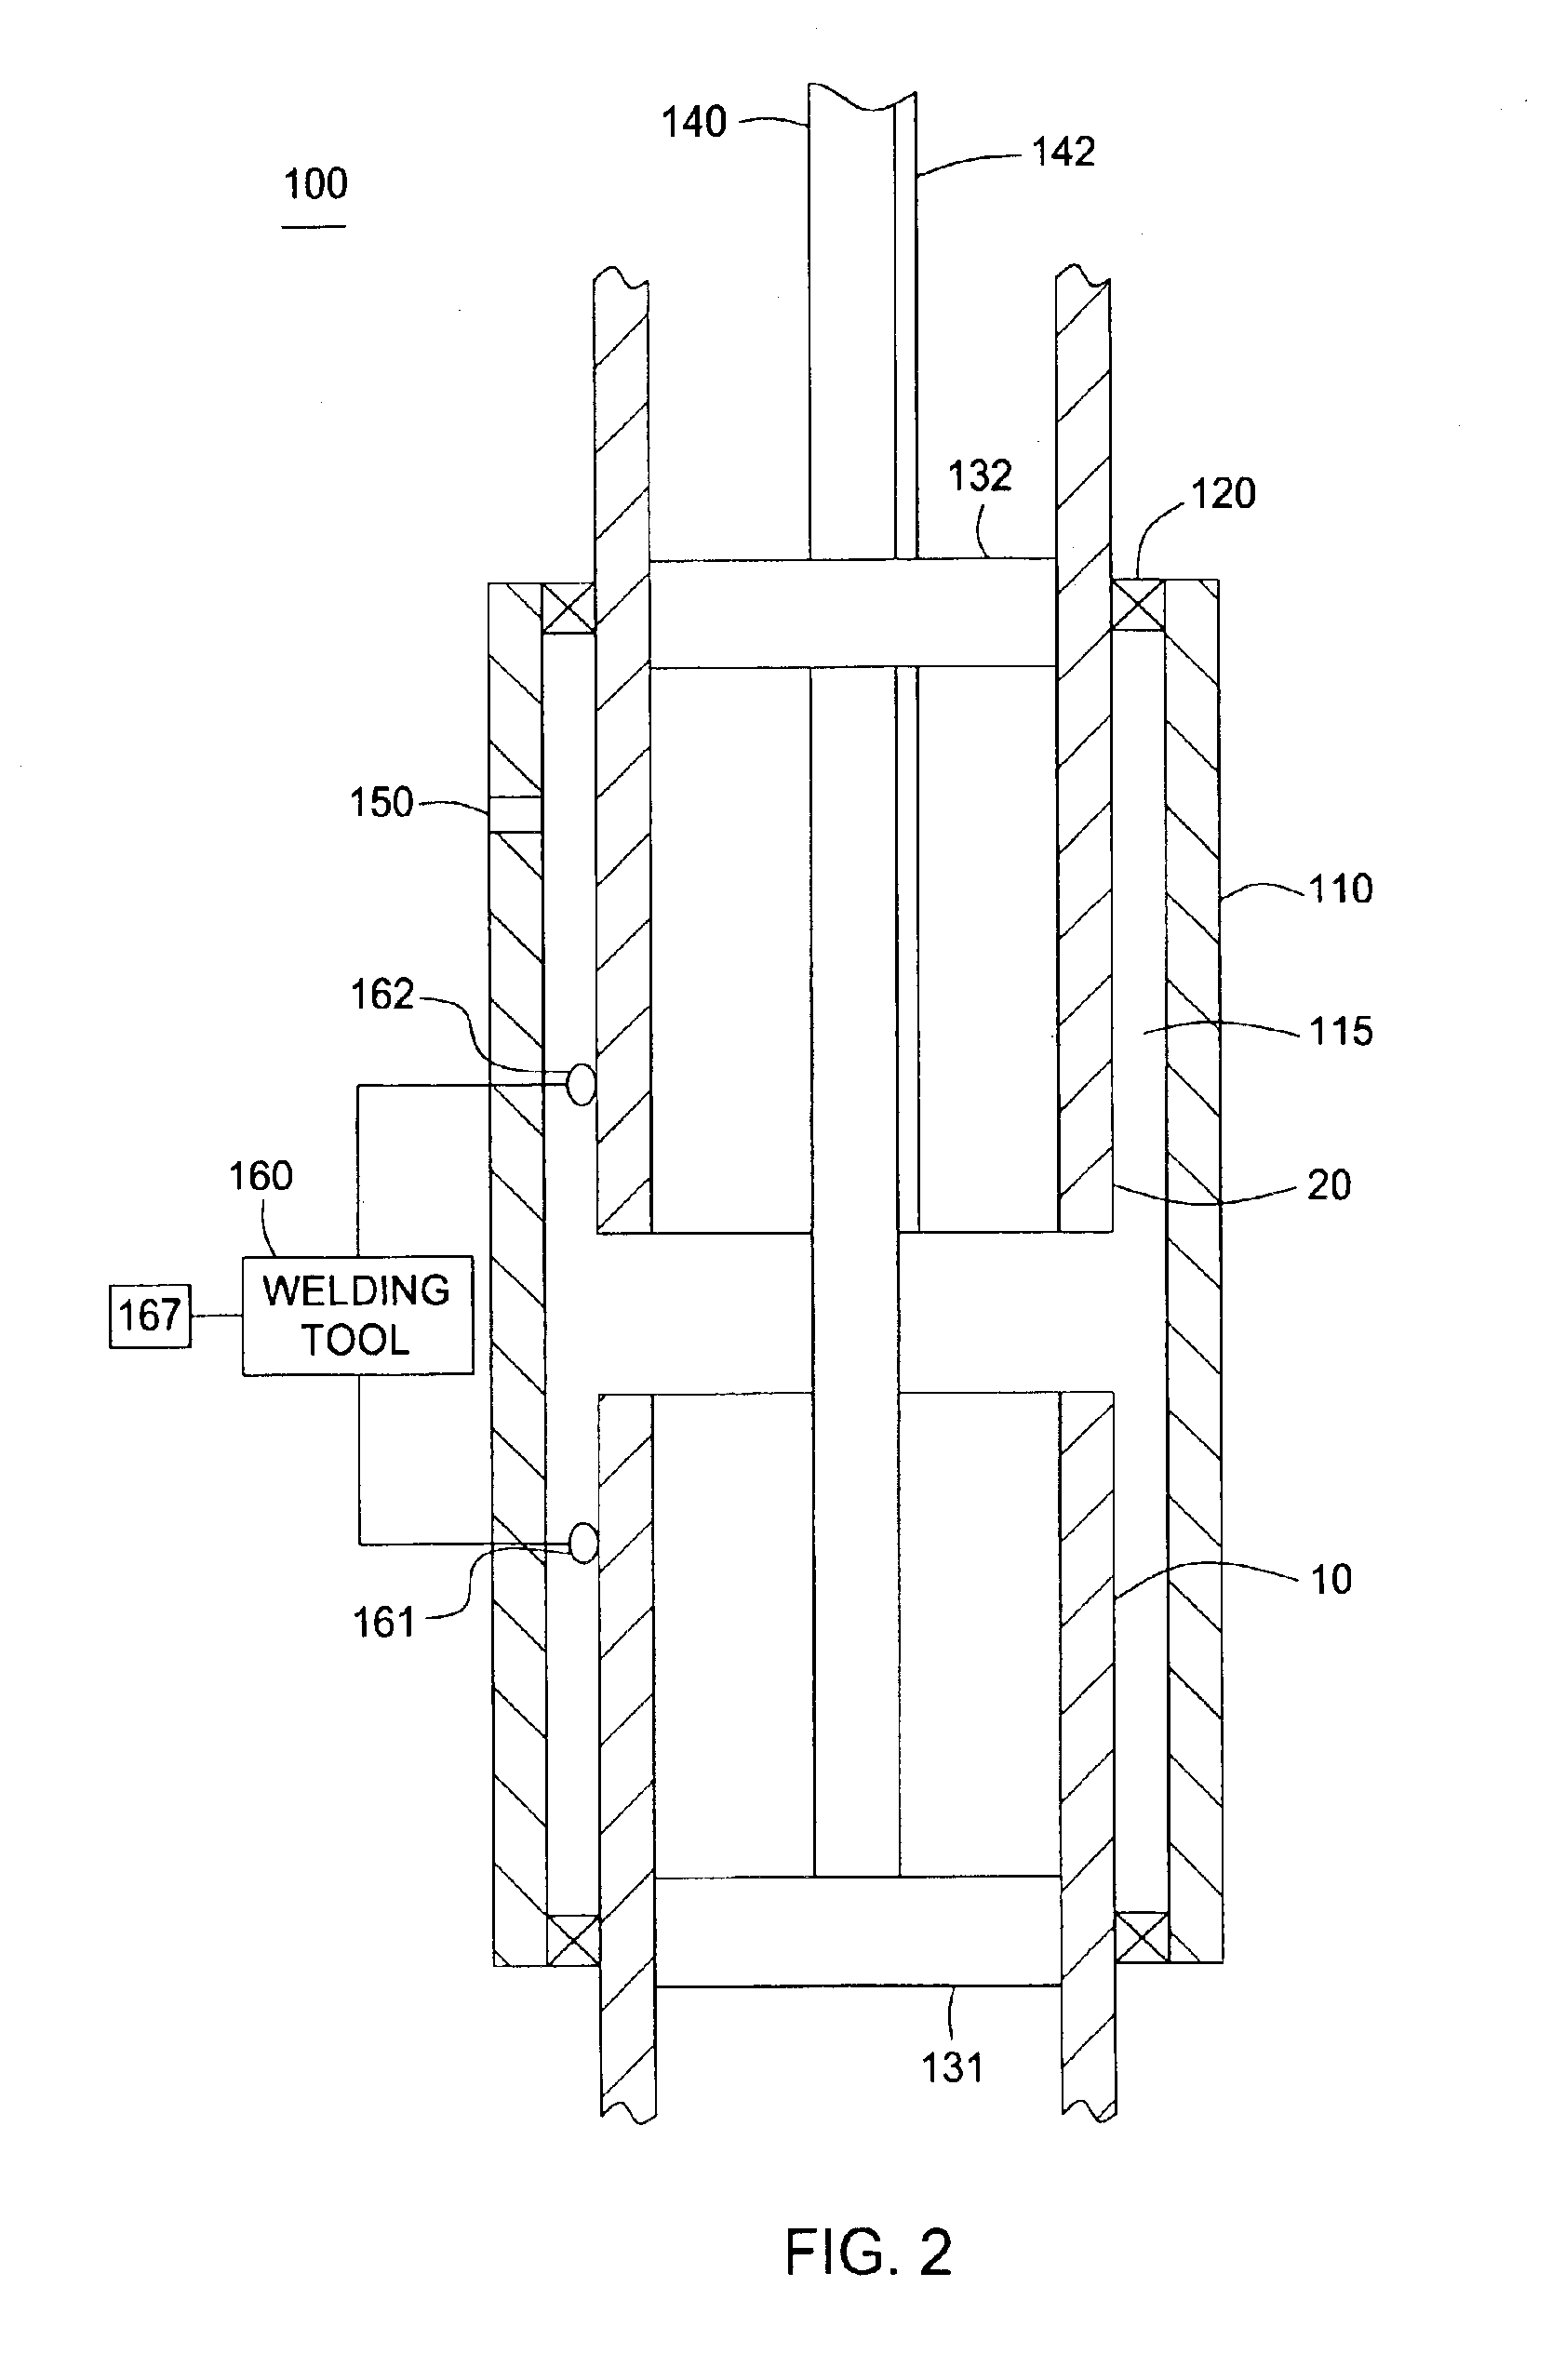 Flash welding process for field joining of tubulars for expandable applications